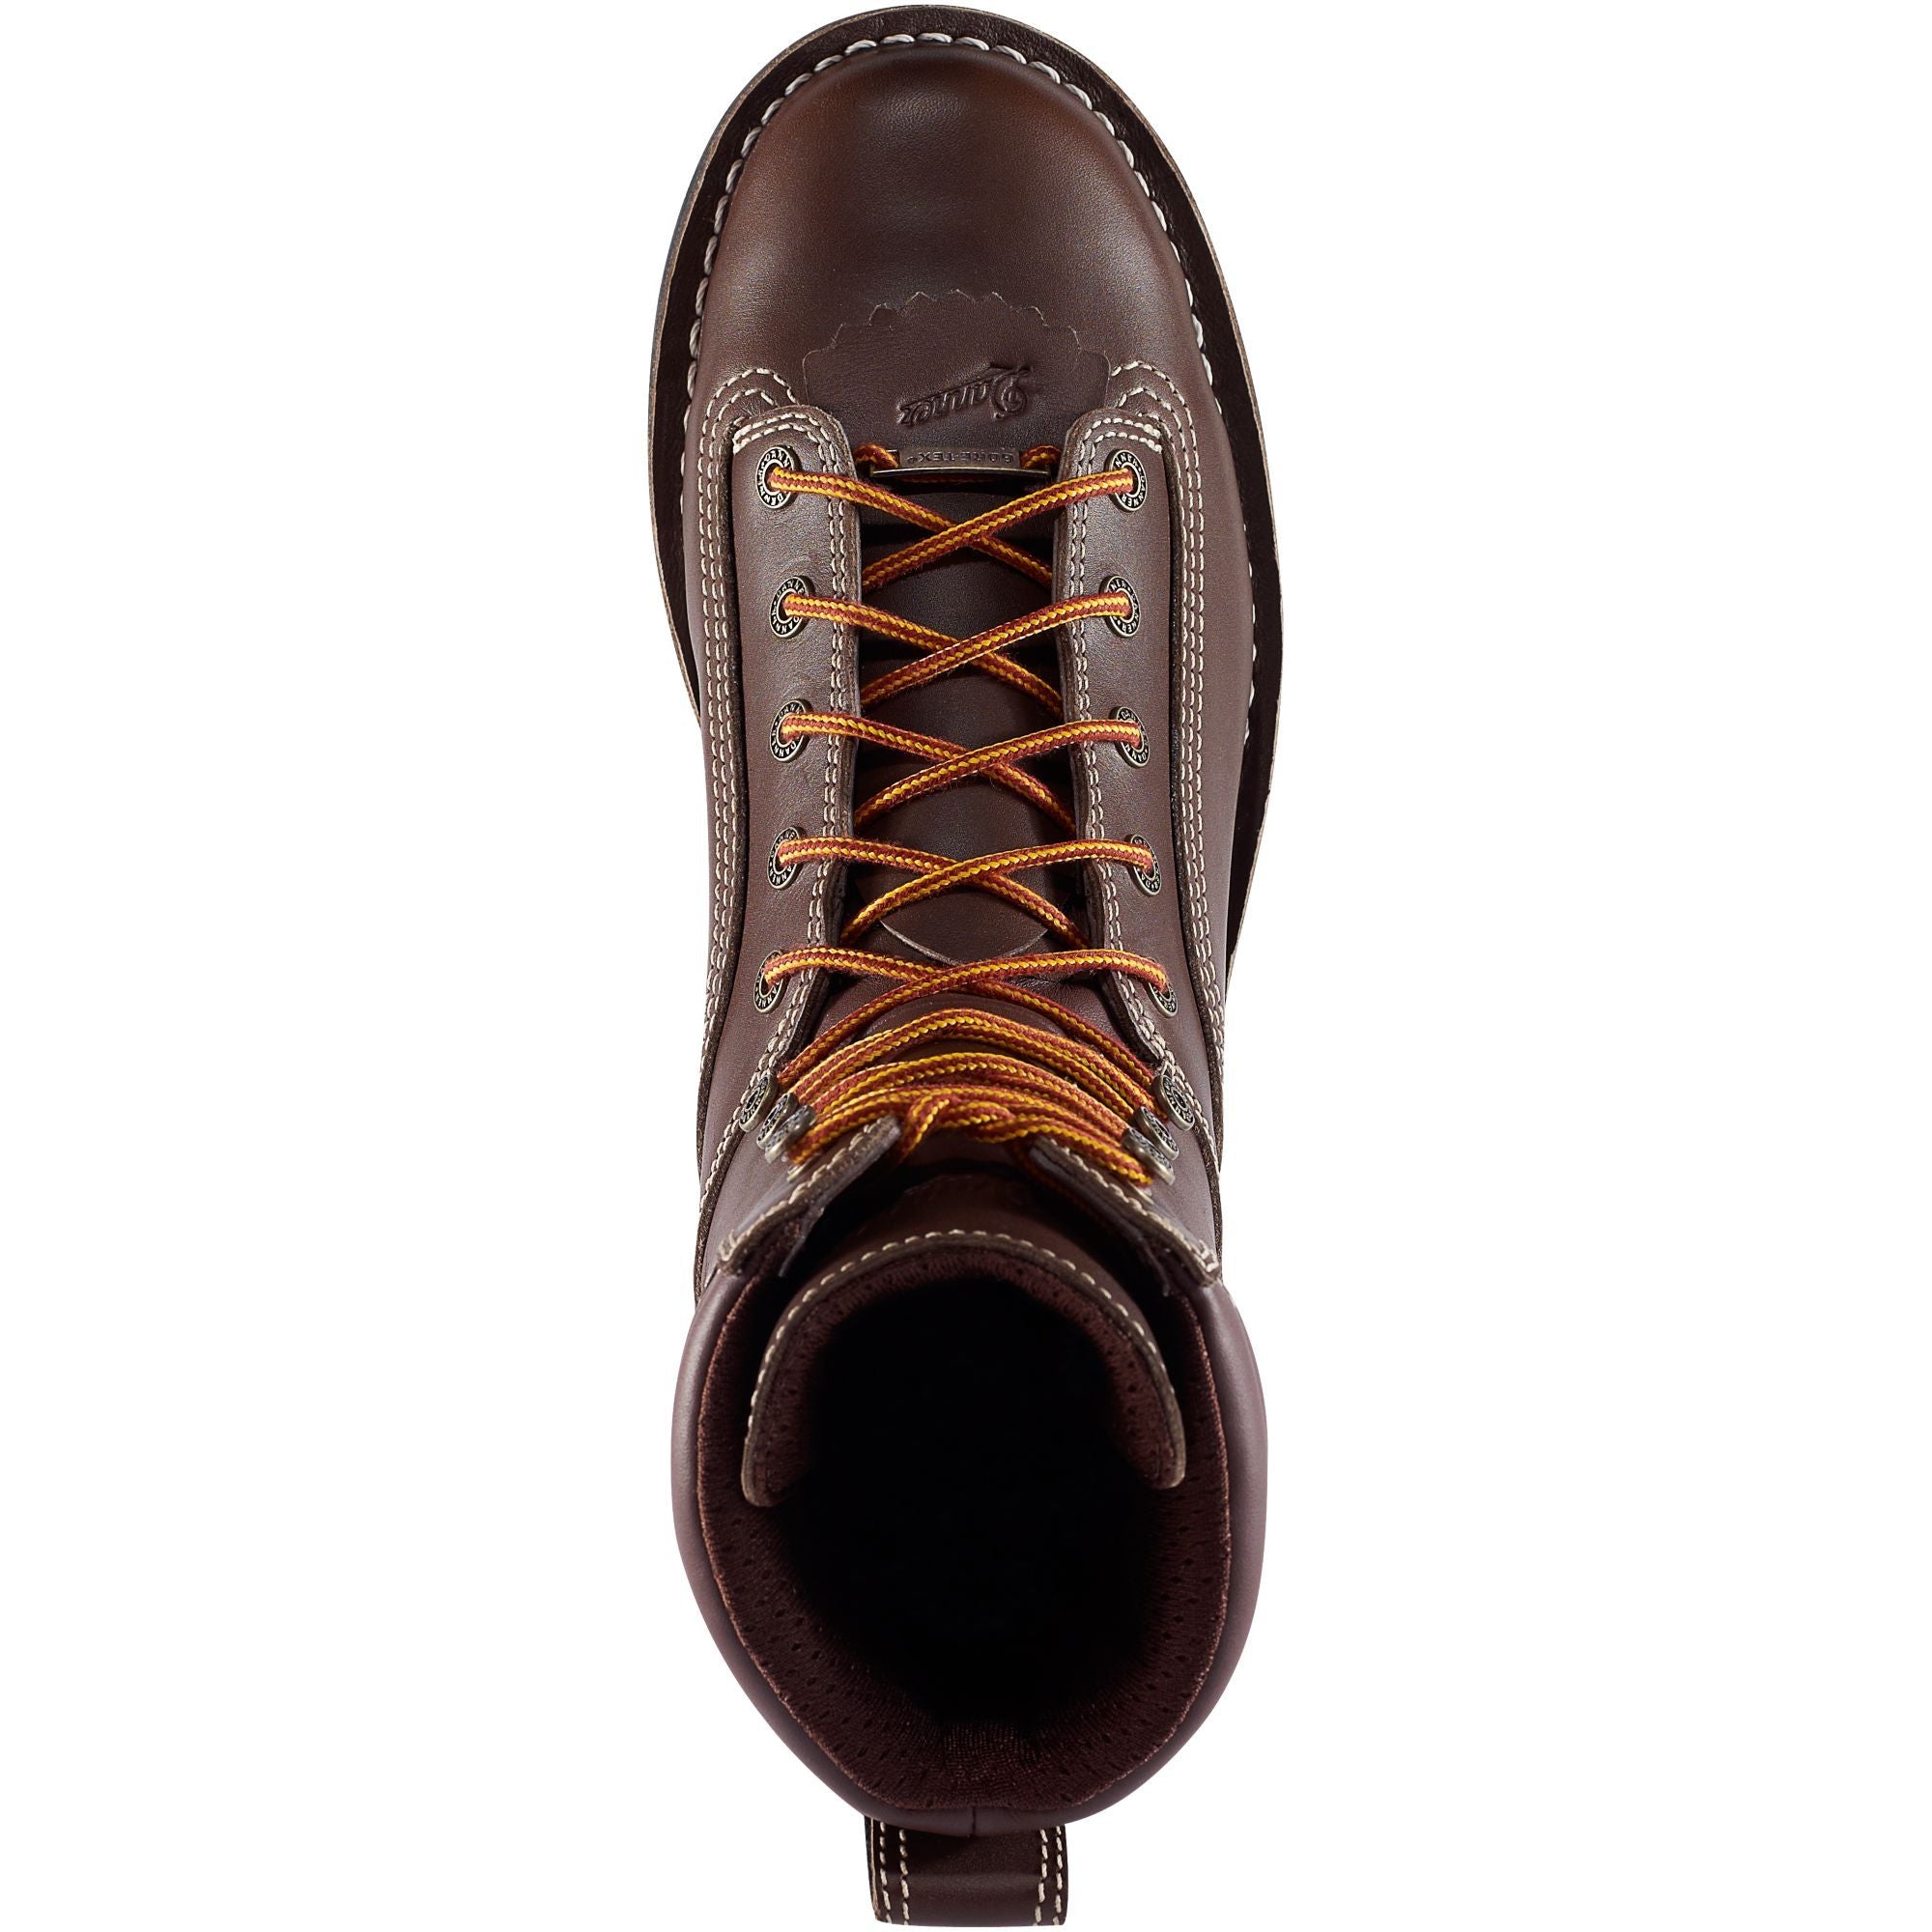 Danner Men's Quarry USA Made 8" Alloy Toe WP Work Boot - Brown - 17307  - Overlook Boots